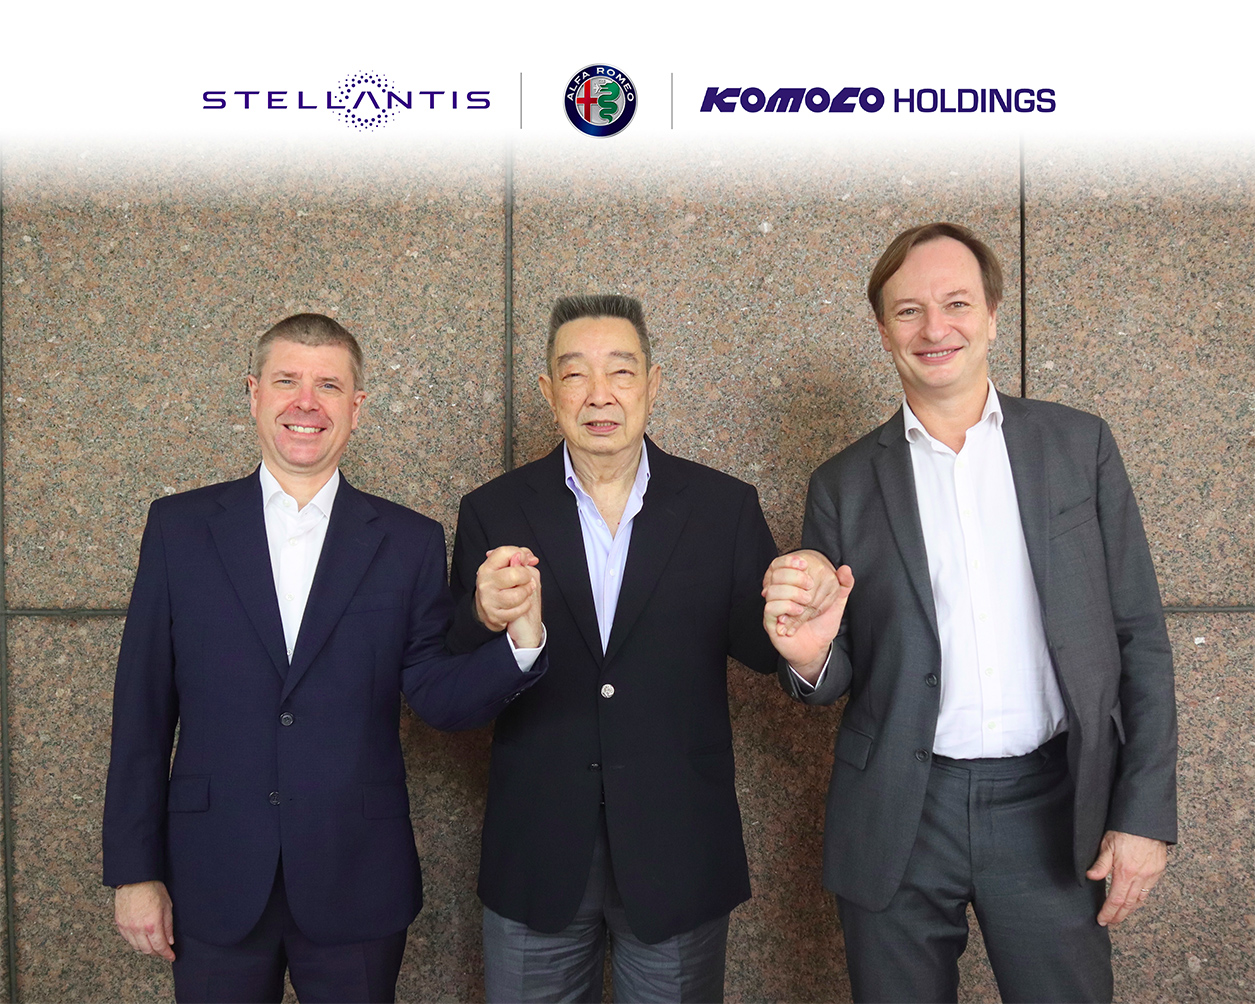 From left: Mr Christophe Musy, Head of ASEAN and General Distributors, Stellantis; Mr Teo Hock Seng, Komoco Holdings Executive Chairman; Mr Hugues Fabre, Head of Product Planning, ASEAN and General Distributors, Stellantis.